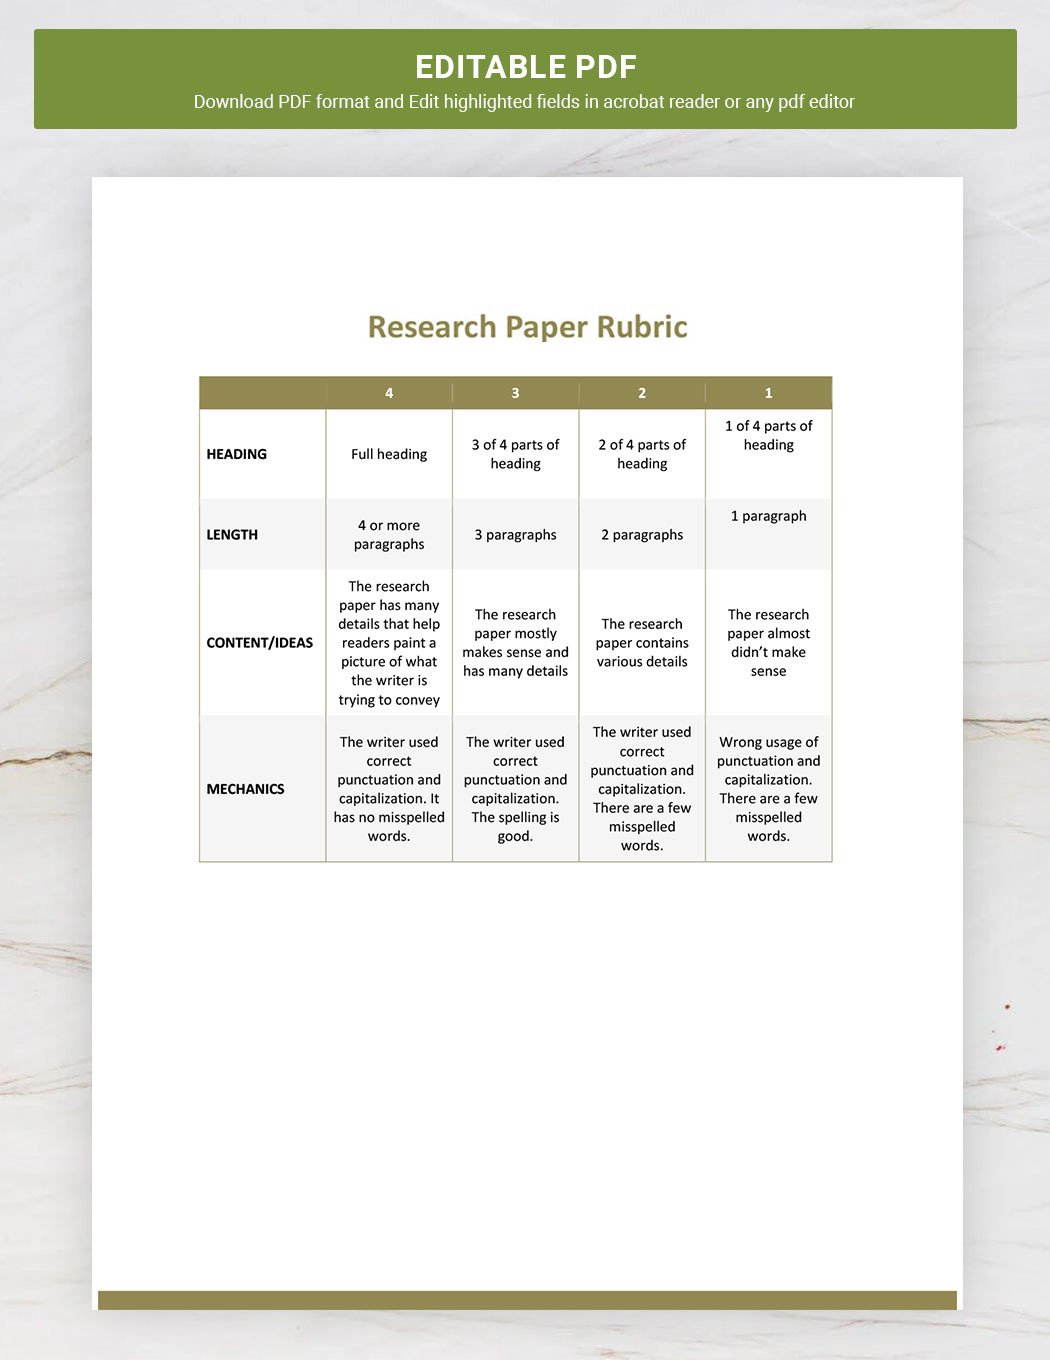 Research Paper Rubric Template Download in Word, Google Docs